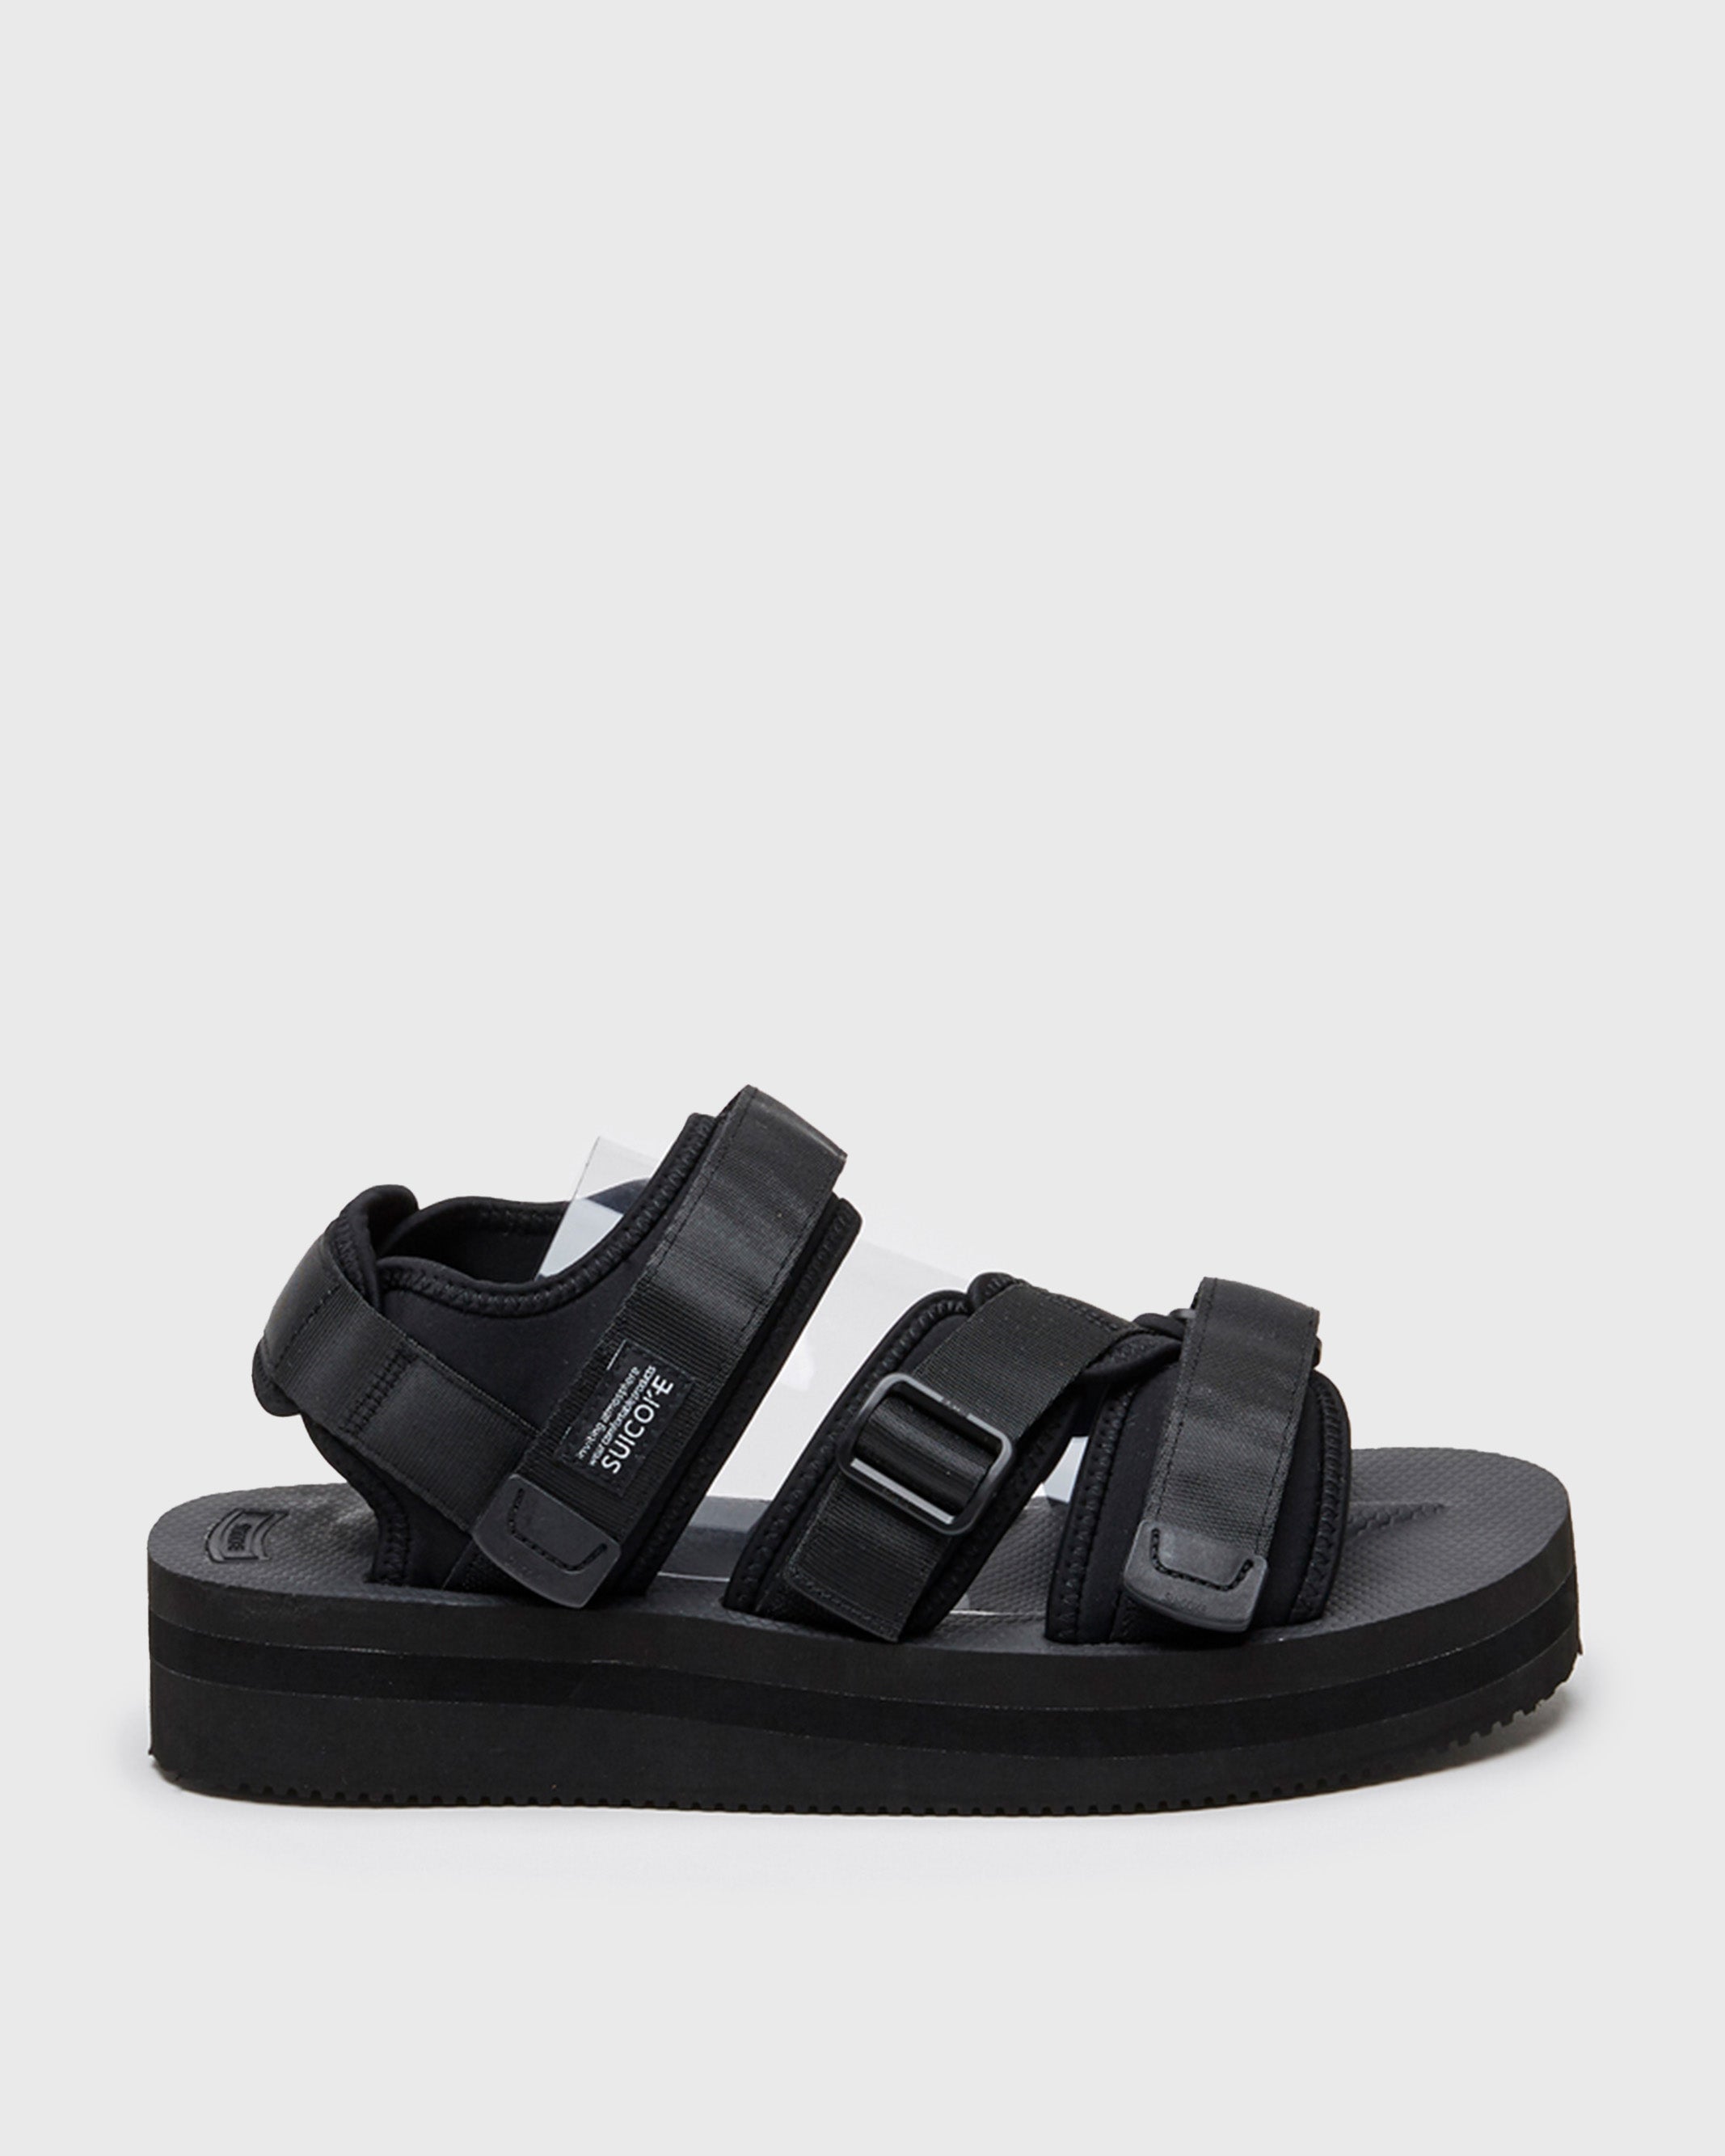 KISEE-VPO in Black | Official SUICOKE US & CANADA Webstore 